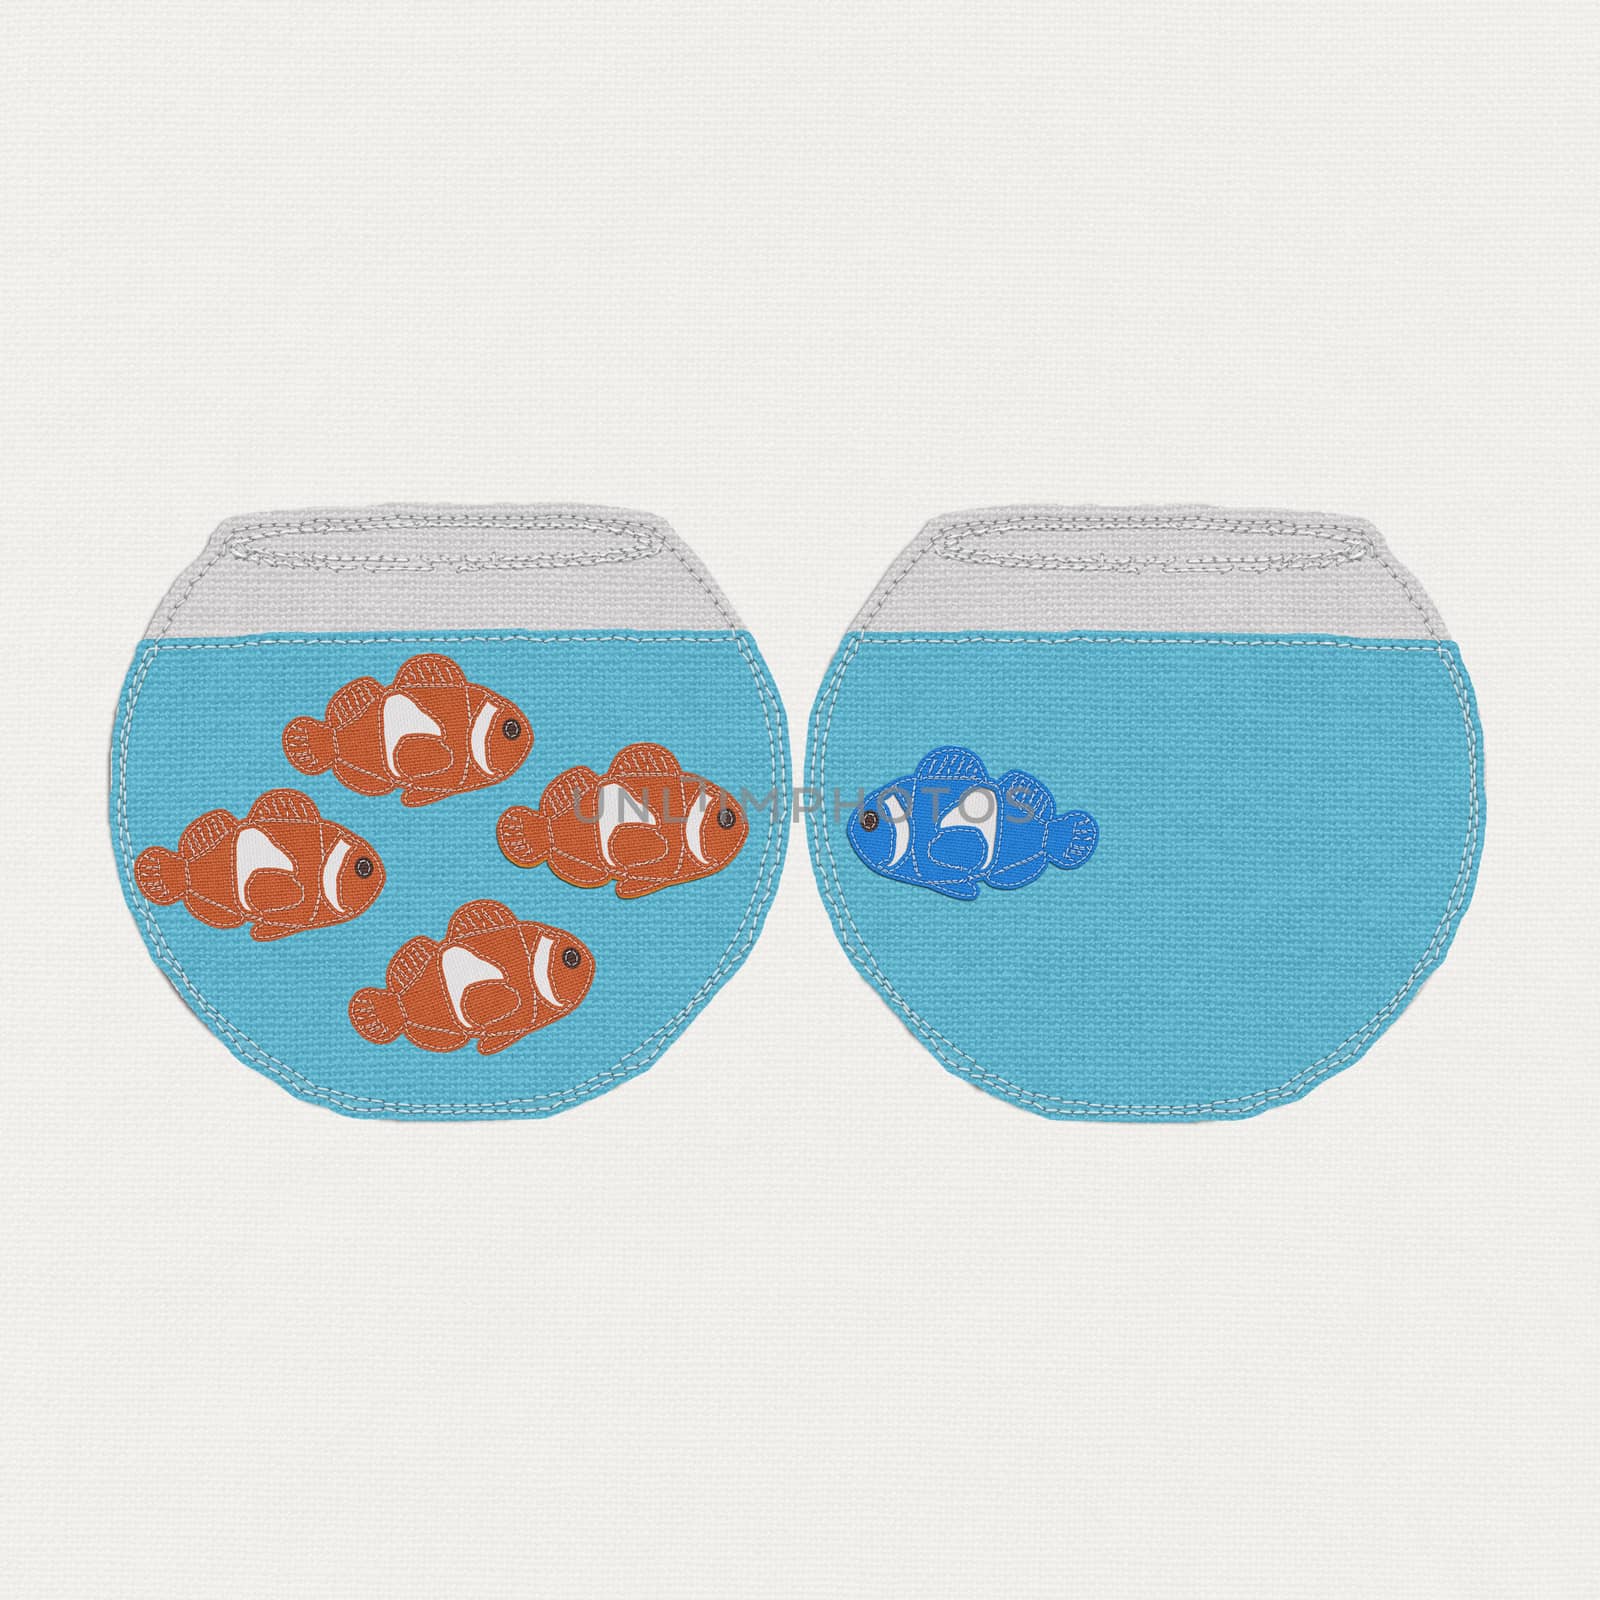 Fish in the bowl with stitch style, unique and diffrent business concept